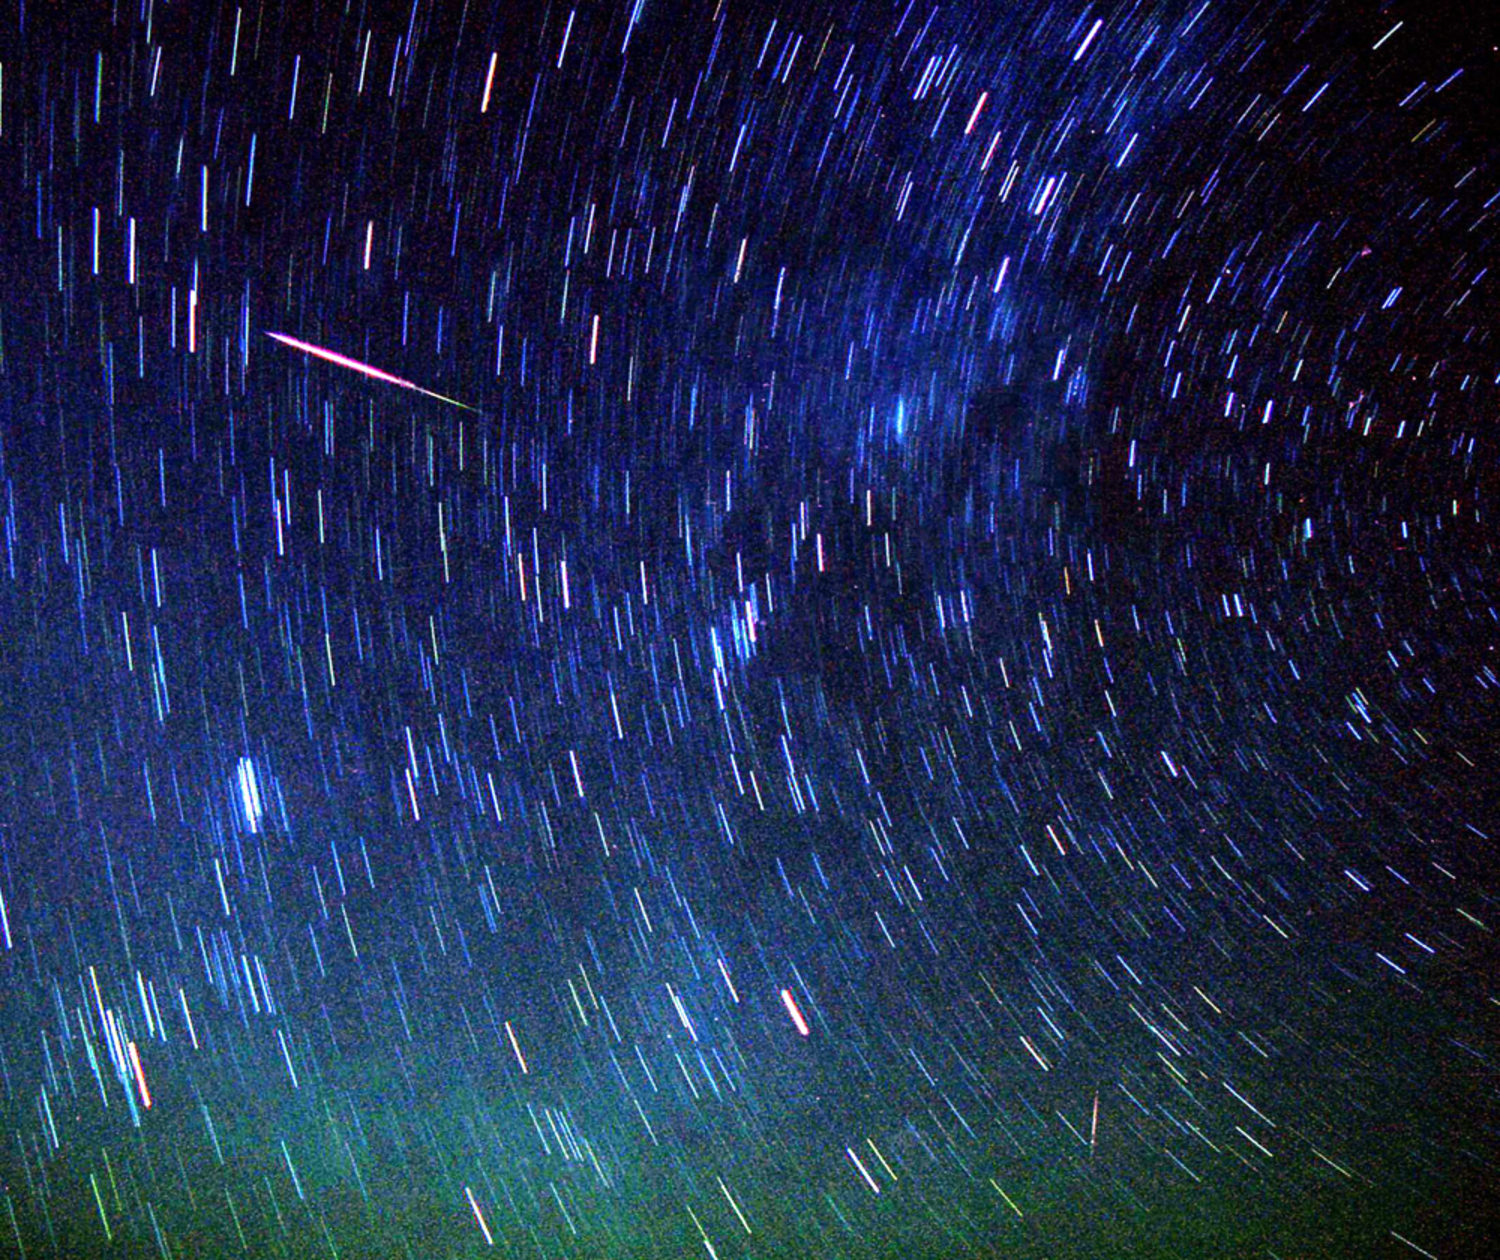 Meteor showers – it's worth looking out for 'shooting stars' all year round